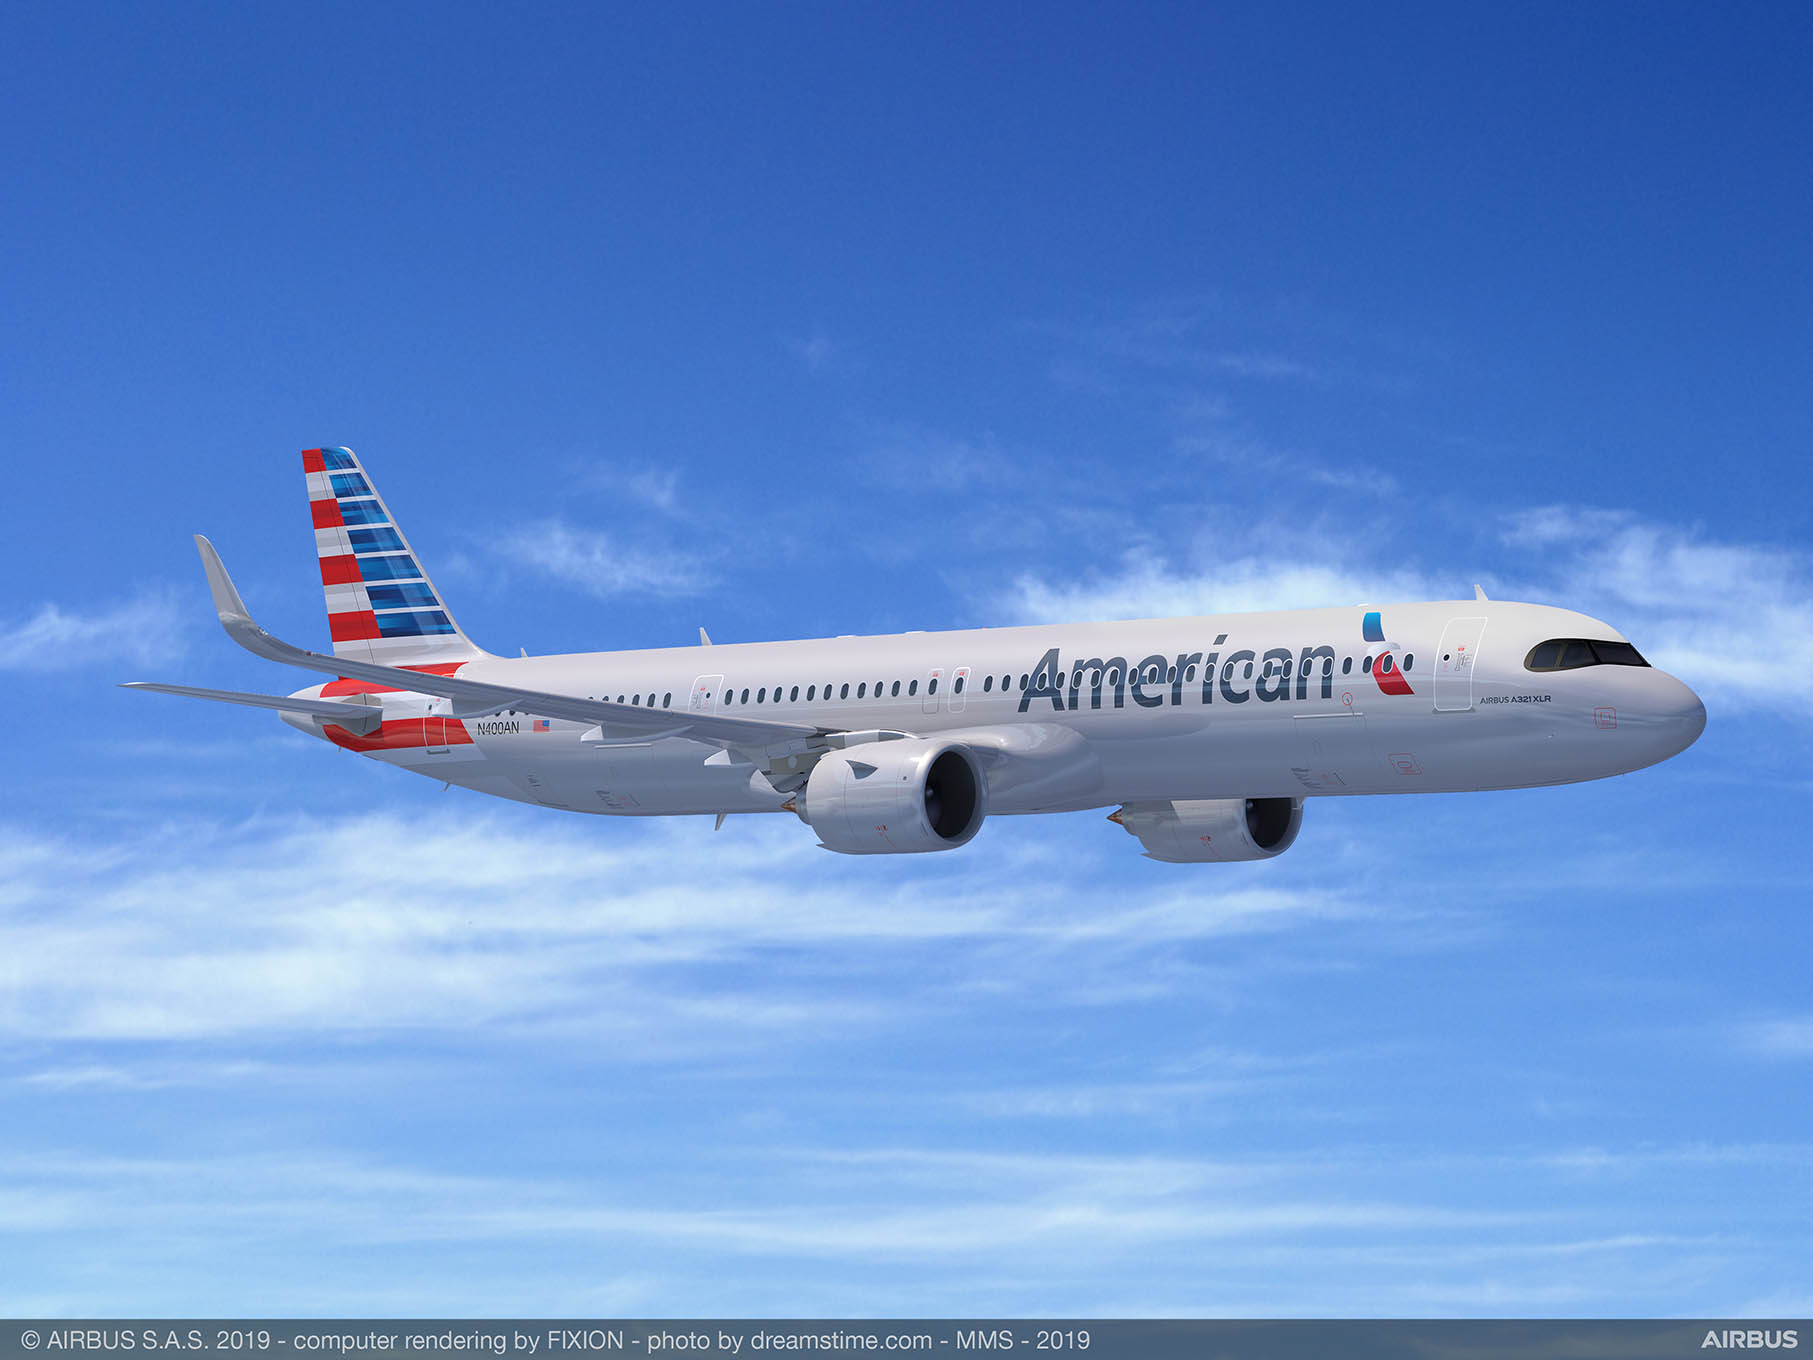 American Airlines works to reopen flying with preflight COVID-19 testing